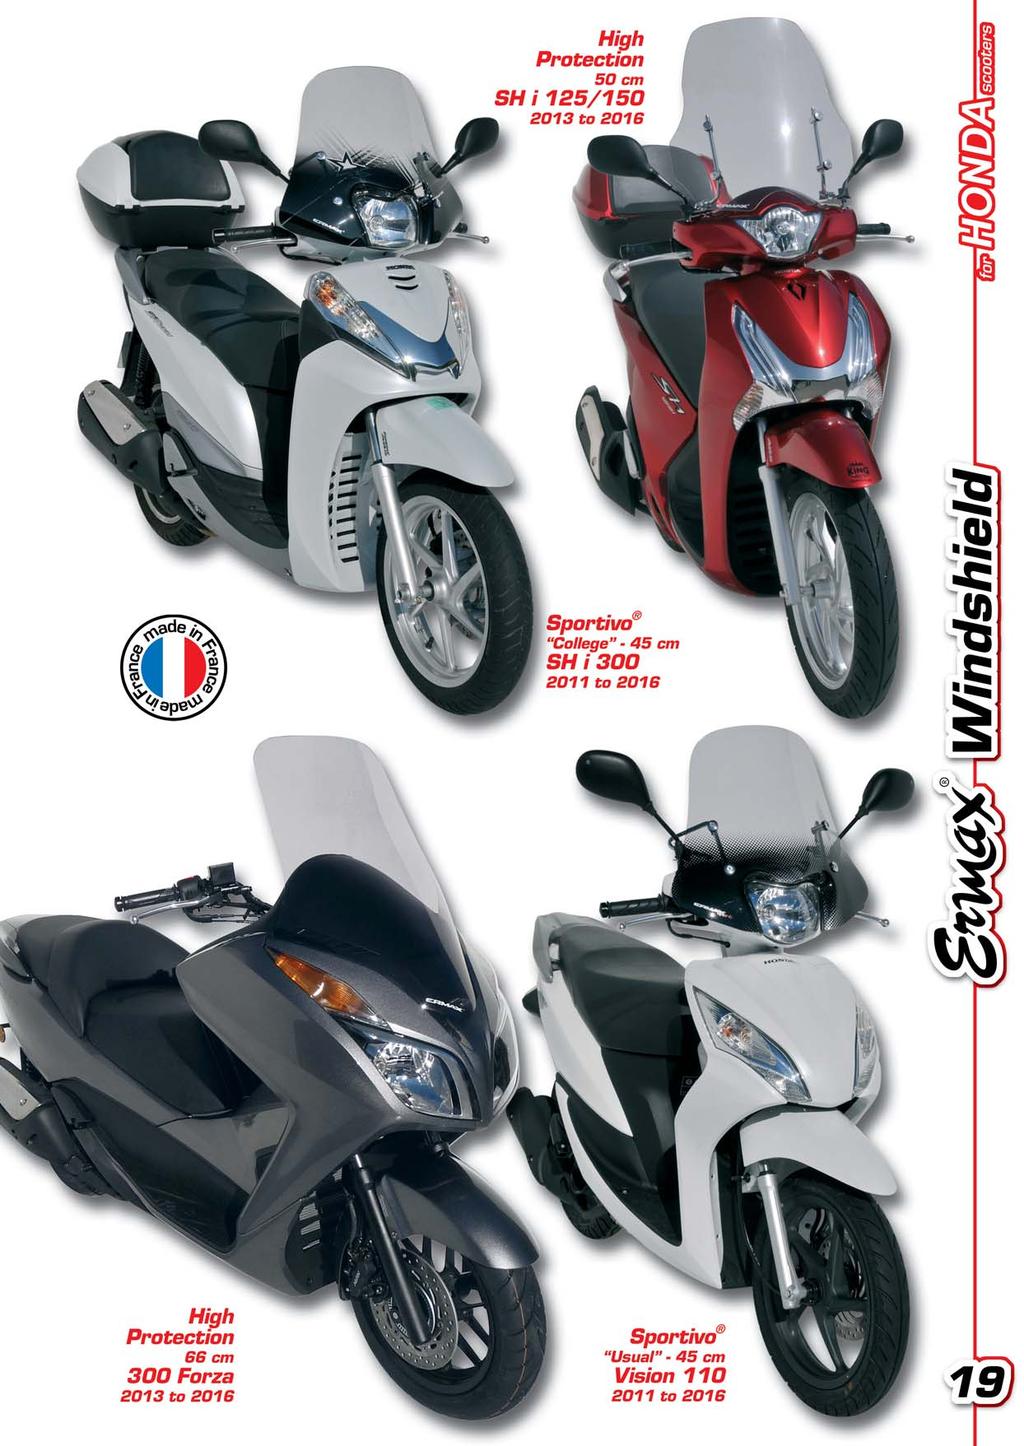 The use of the HONDA brand andor photos representing HONDA scooter models is made solely for